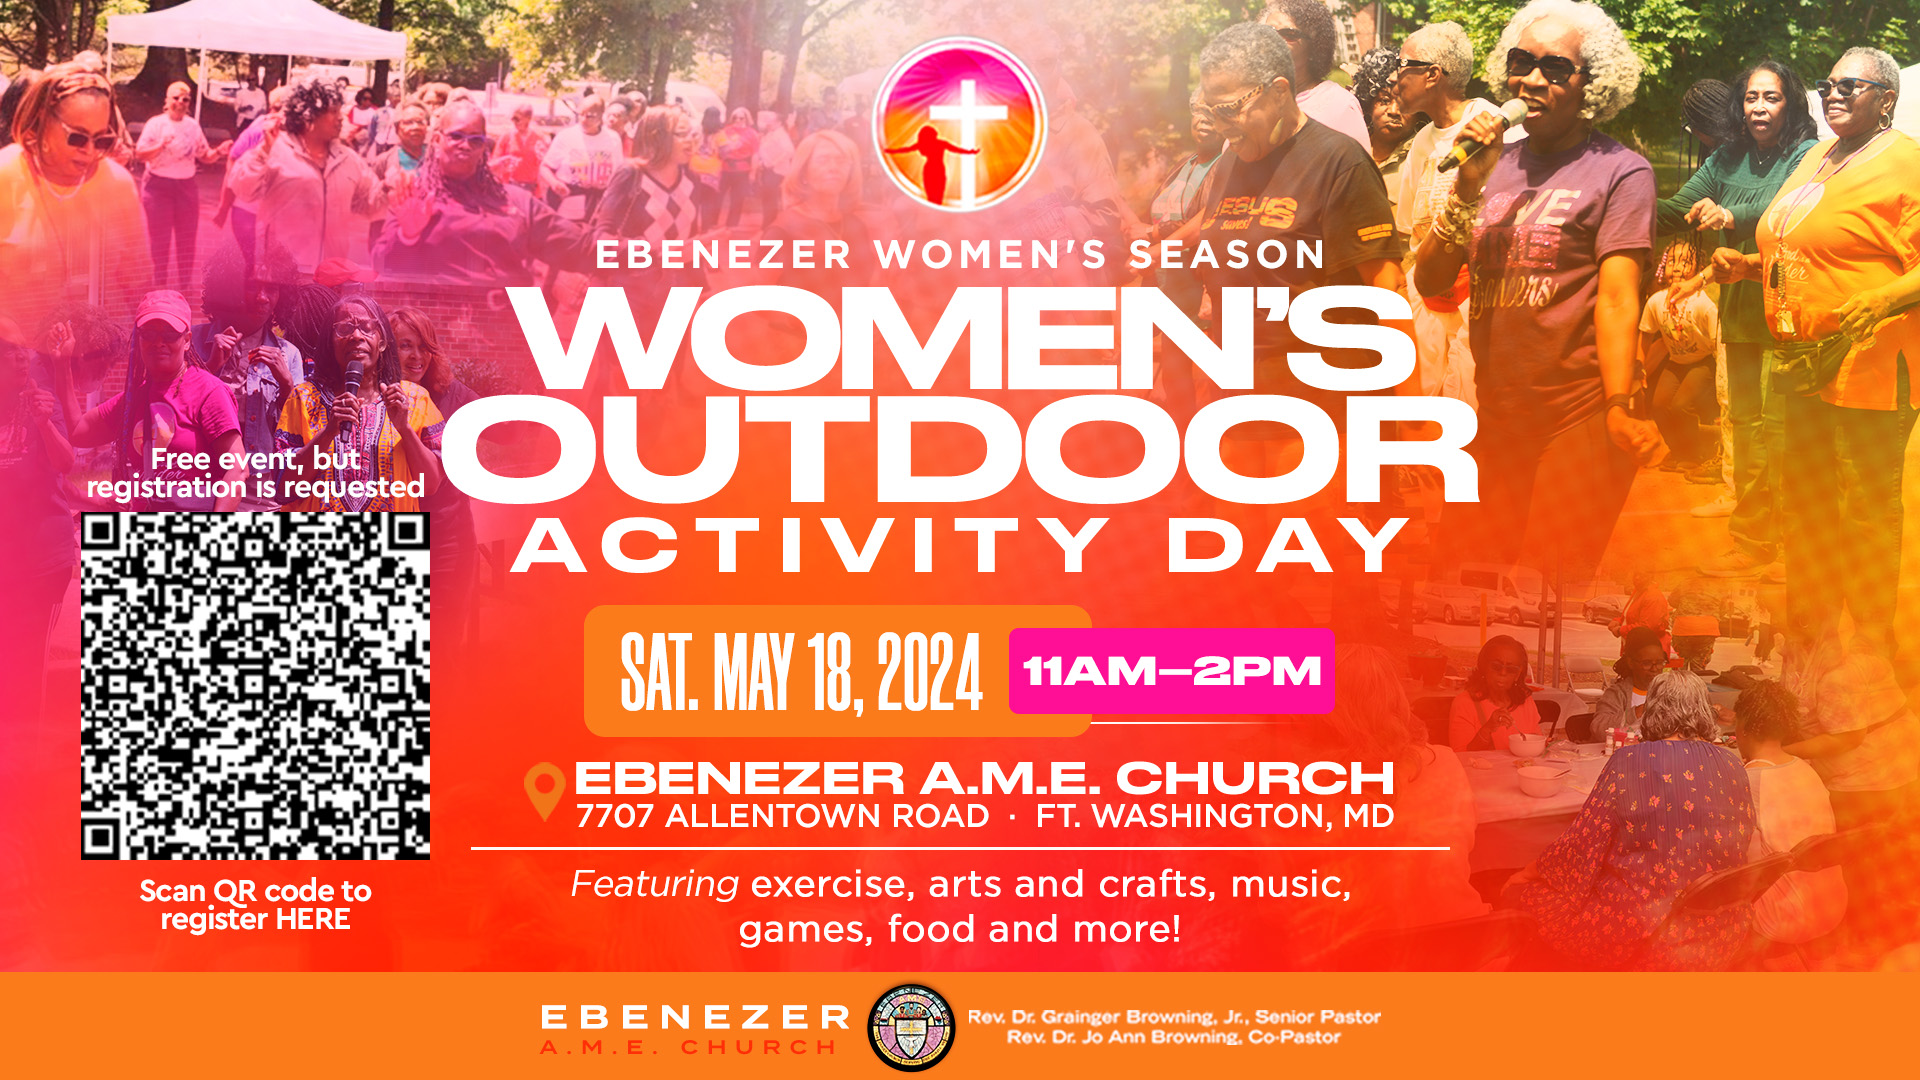 Women's Outdoor Activity on May 18